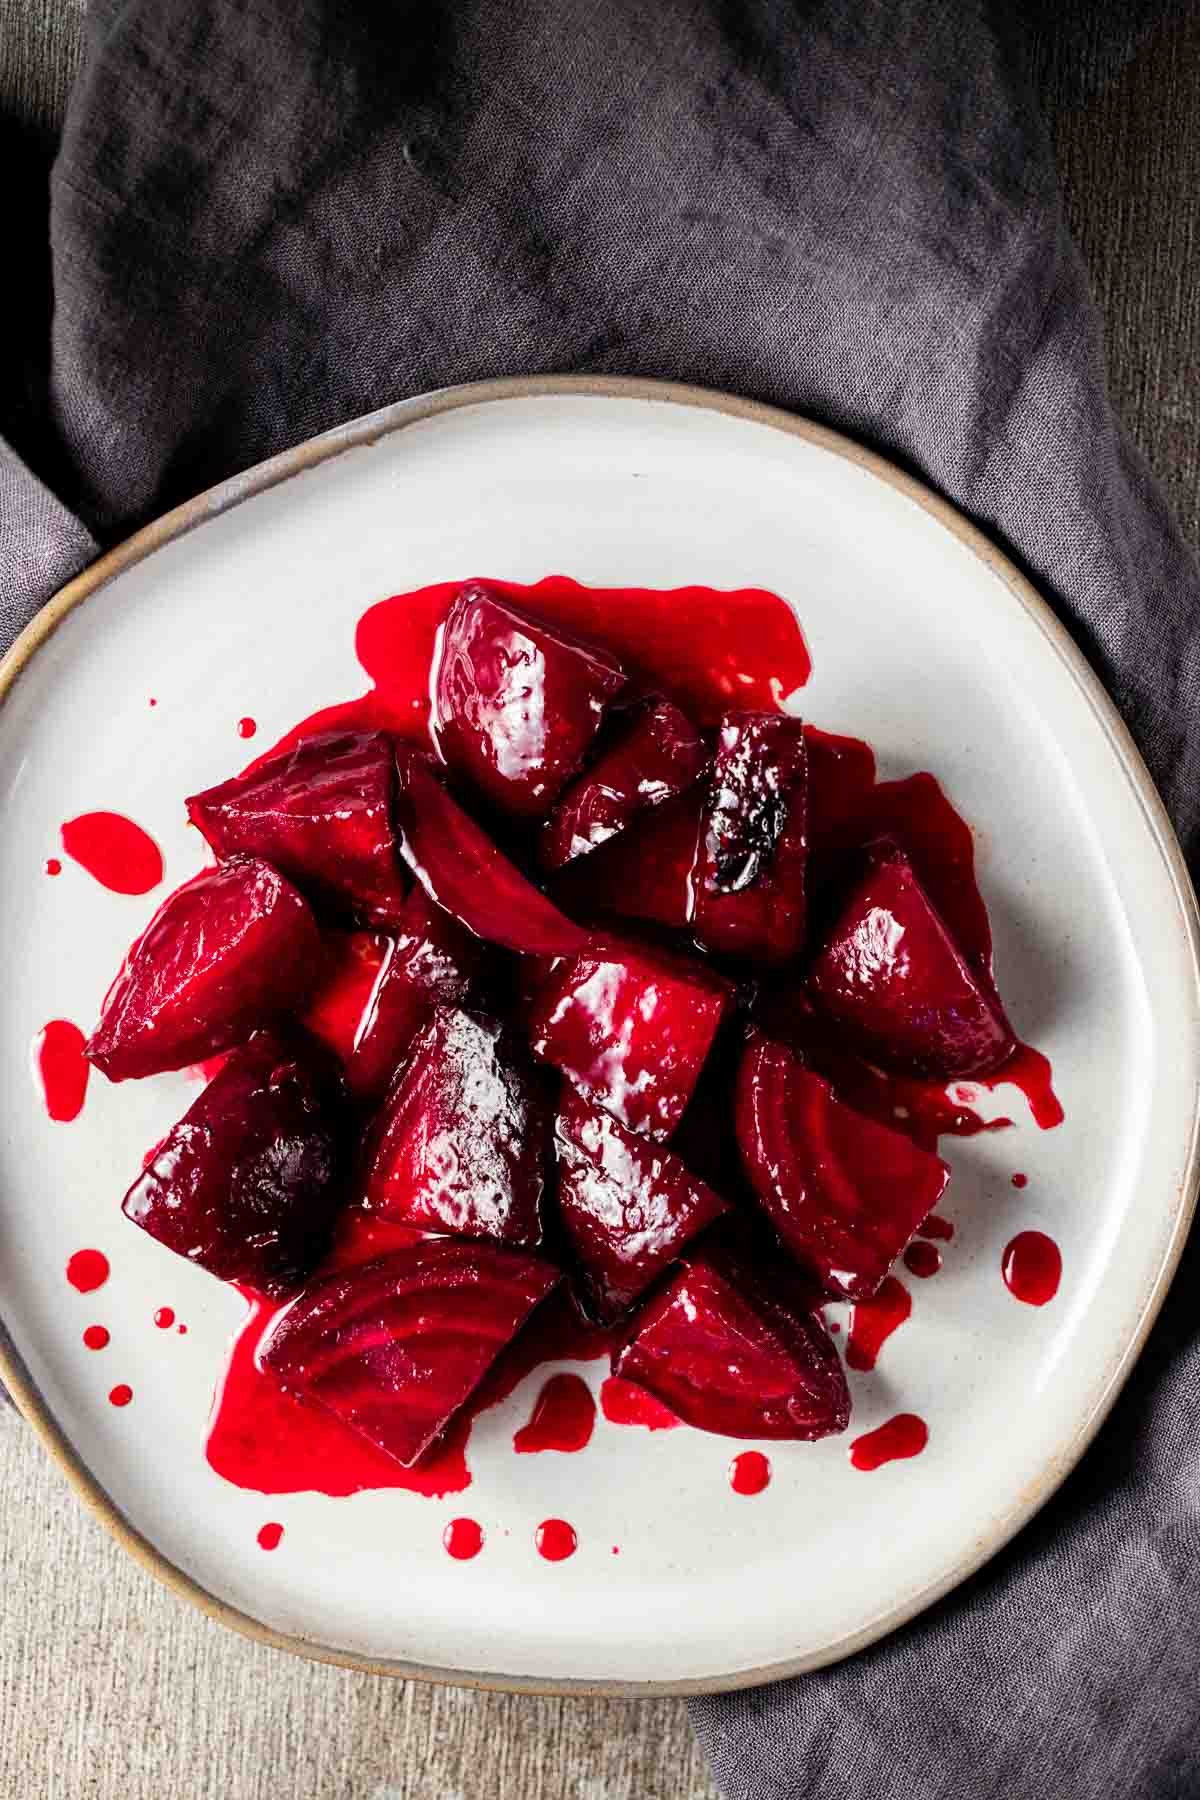 Overhead view of beet pieces with orange glaze on a white plate.